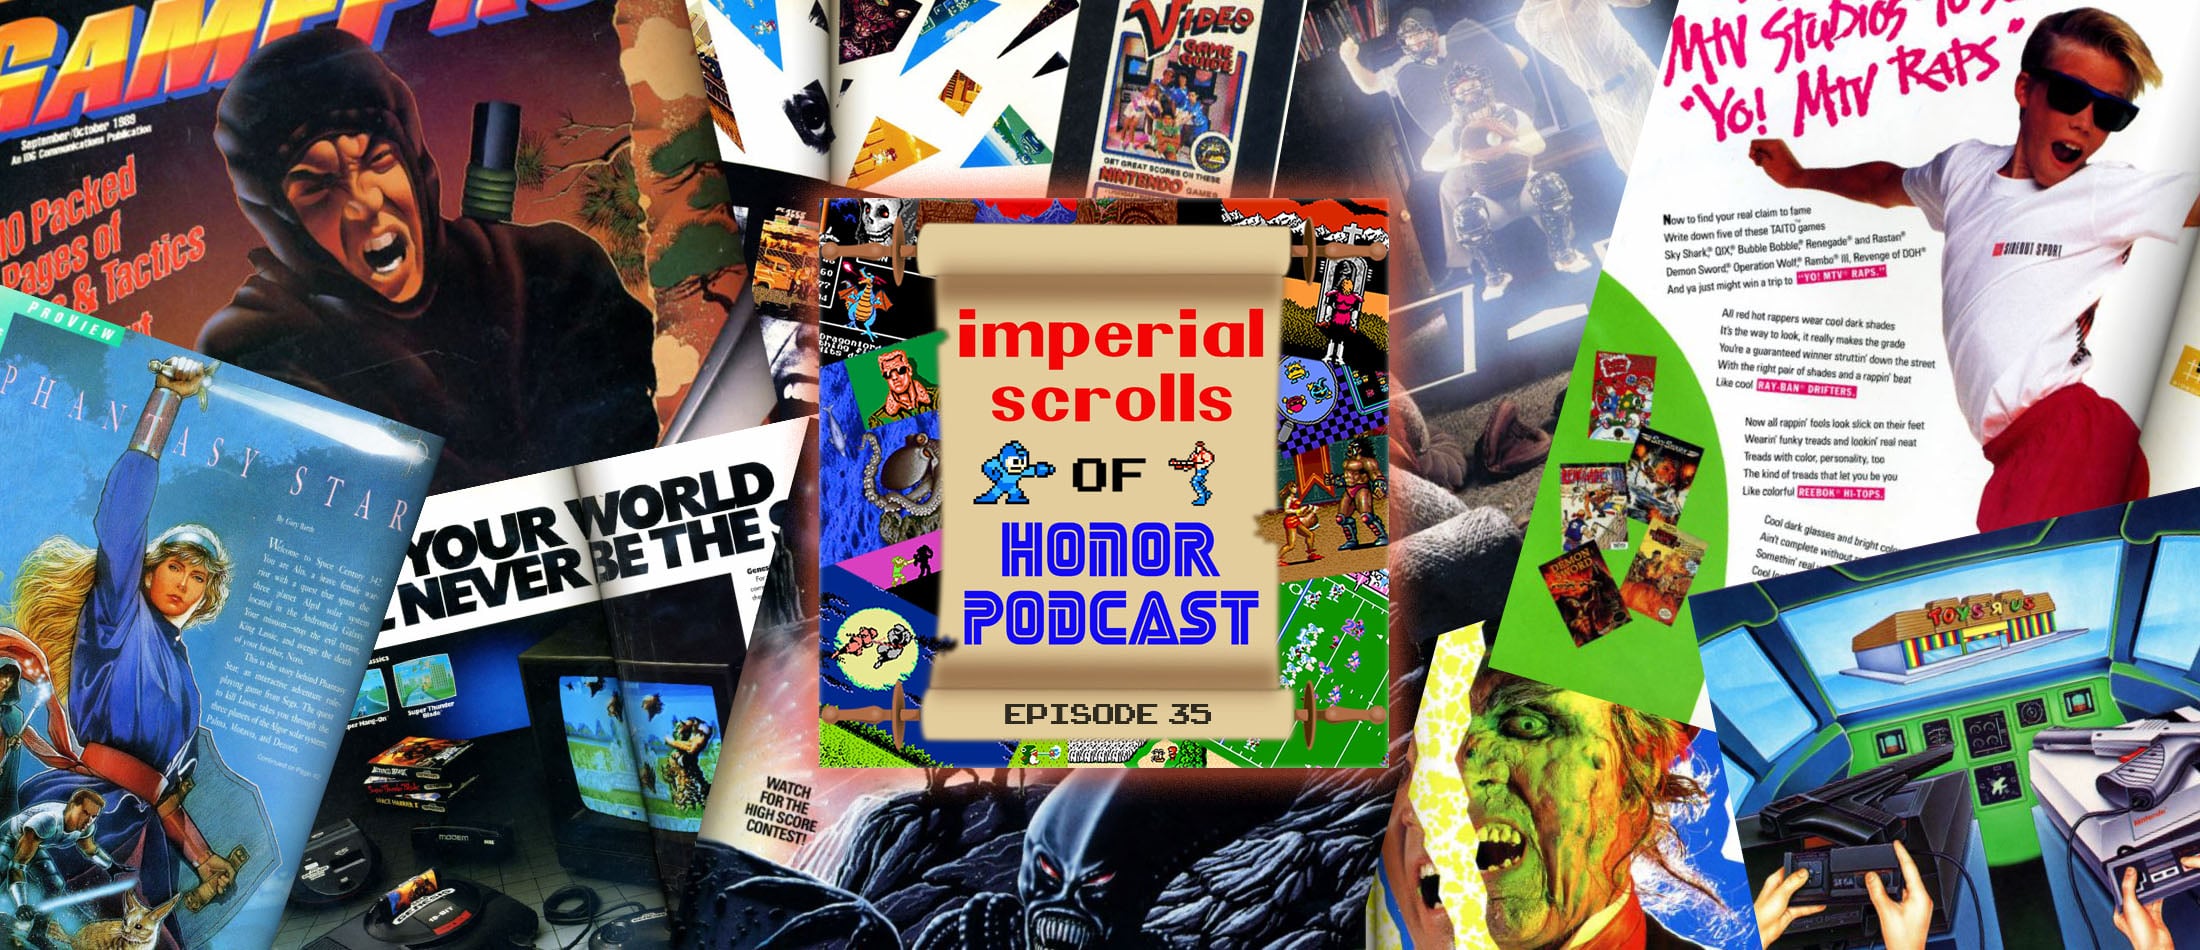 Imperial Scrolls of Honor Podcast - Episode 35 - GamePro #3